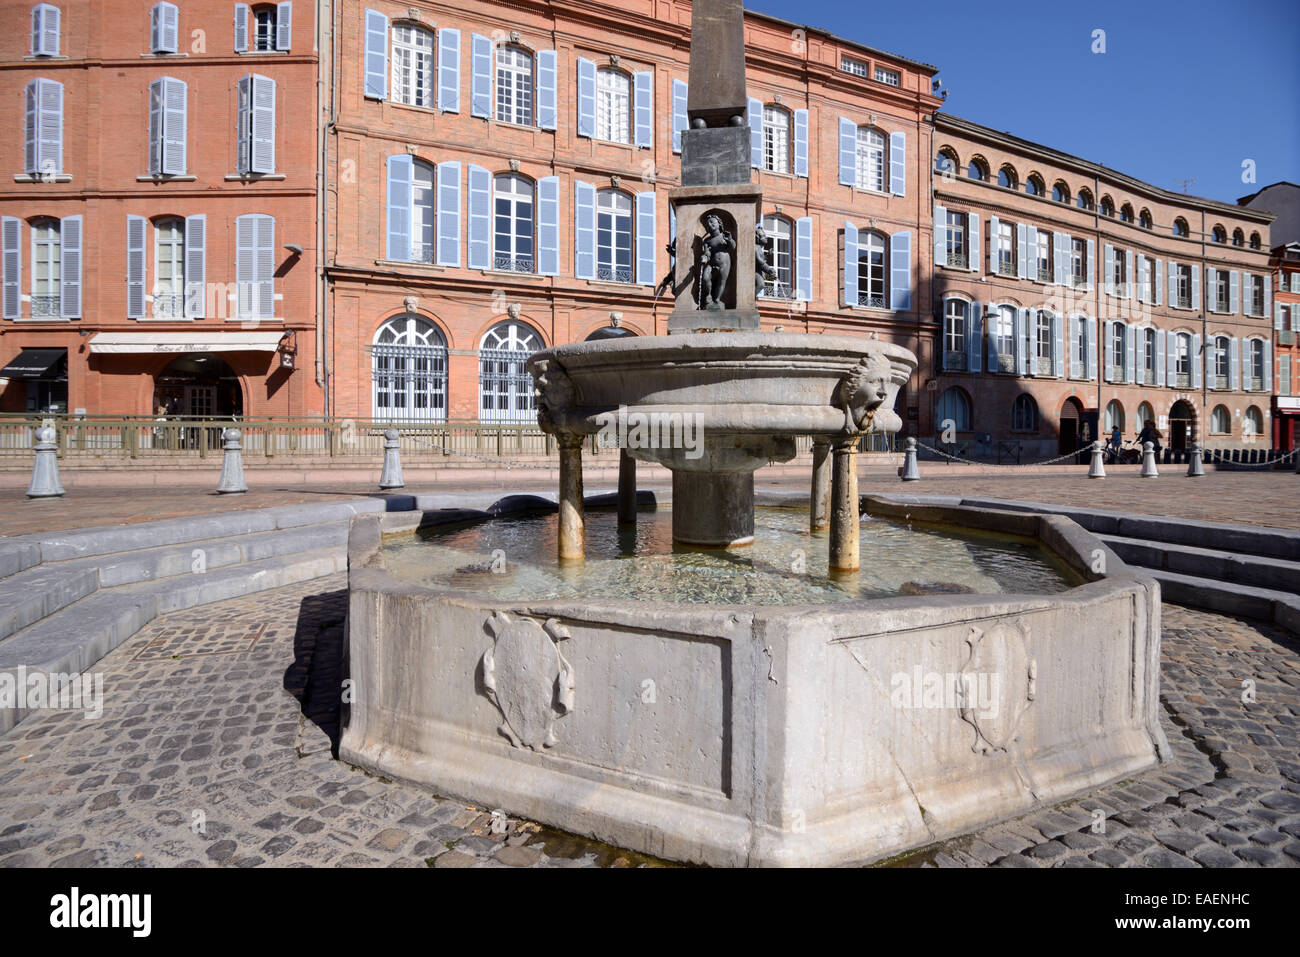 Street Fountain in Place Etienne and Red Brick Facades of Terraced Townhouses Toulouse France Stock Photo